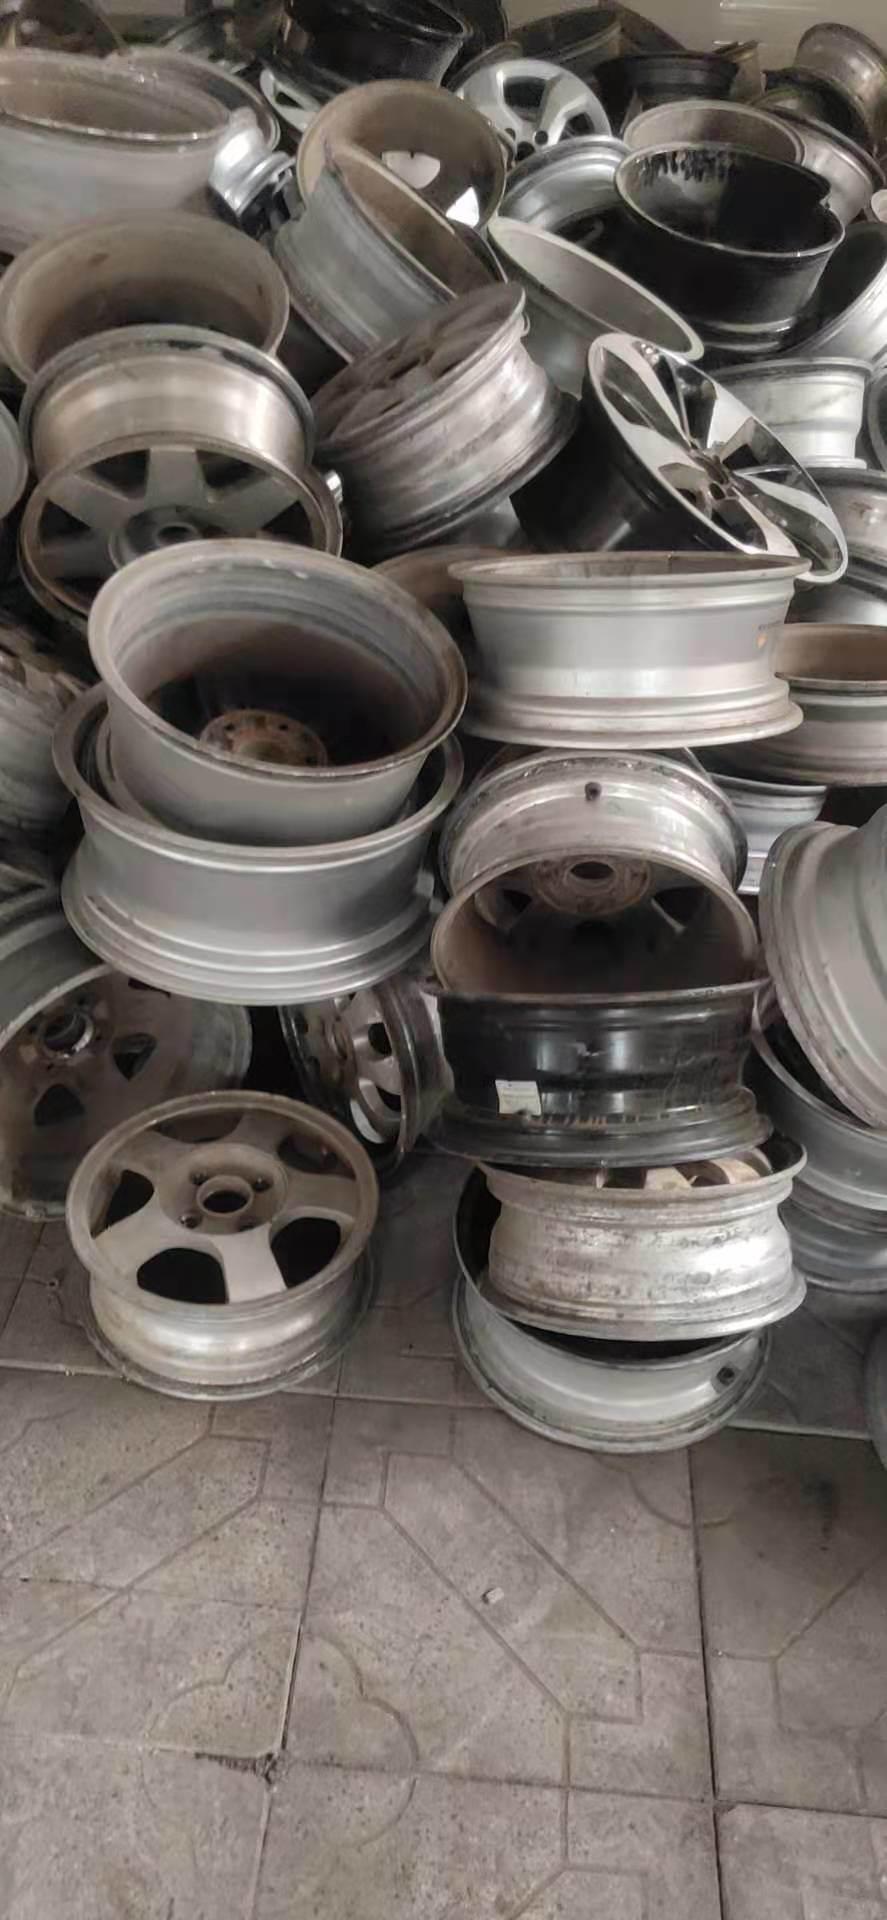 High-Quality Scrap Wheel Hub. with a Purity of 99.7%, It Is Sold Directly From The Chinese Factory, and The Price Is Favorable.